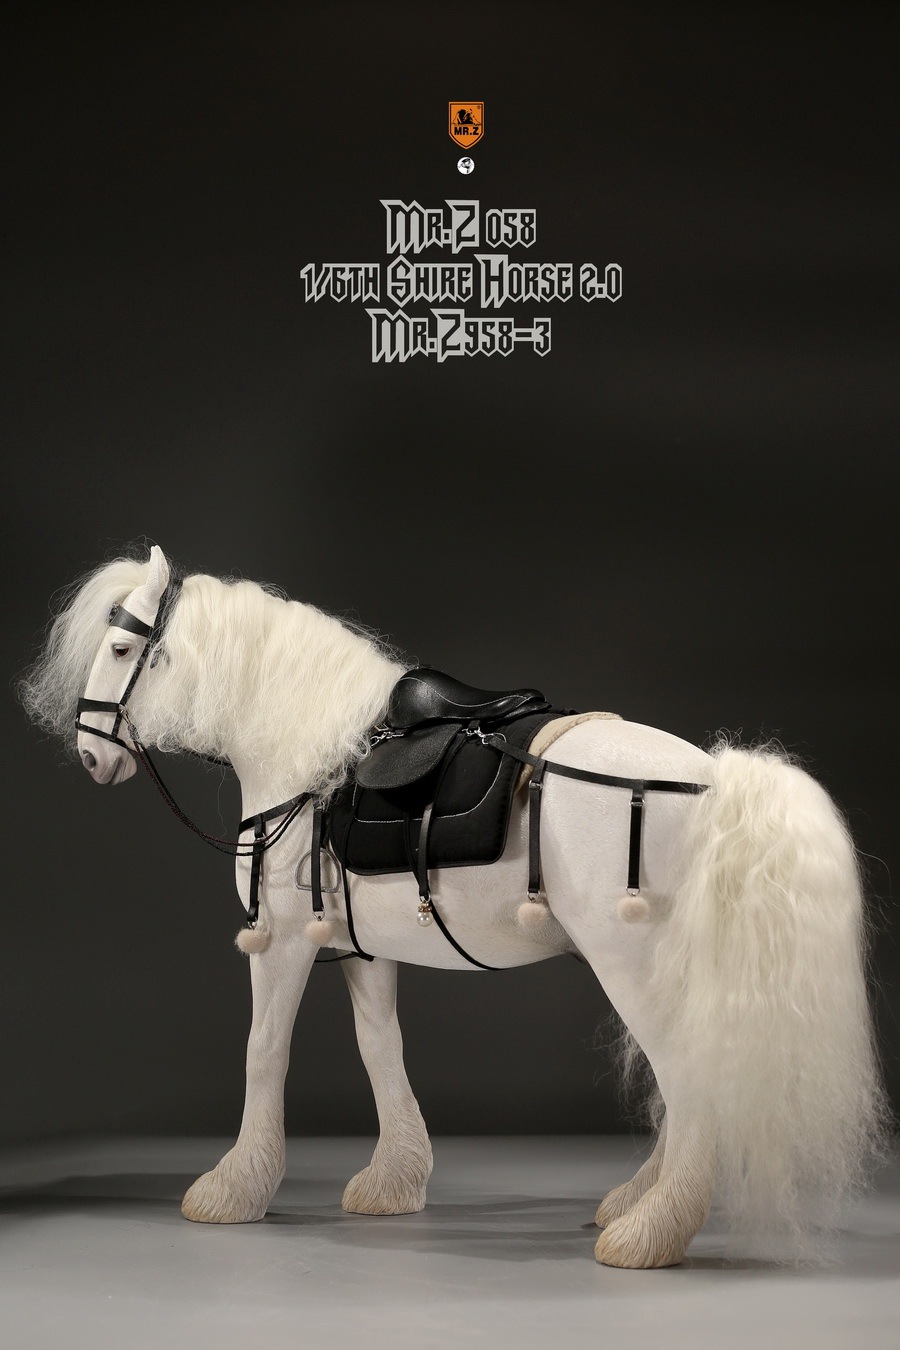 NEW PRODUCT: MR. Z: 58th round-Shire Horse 2.0 version full set of 5 colors  08575311